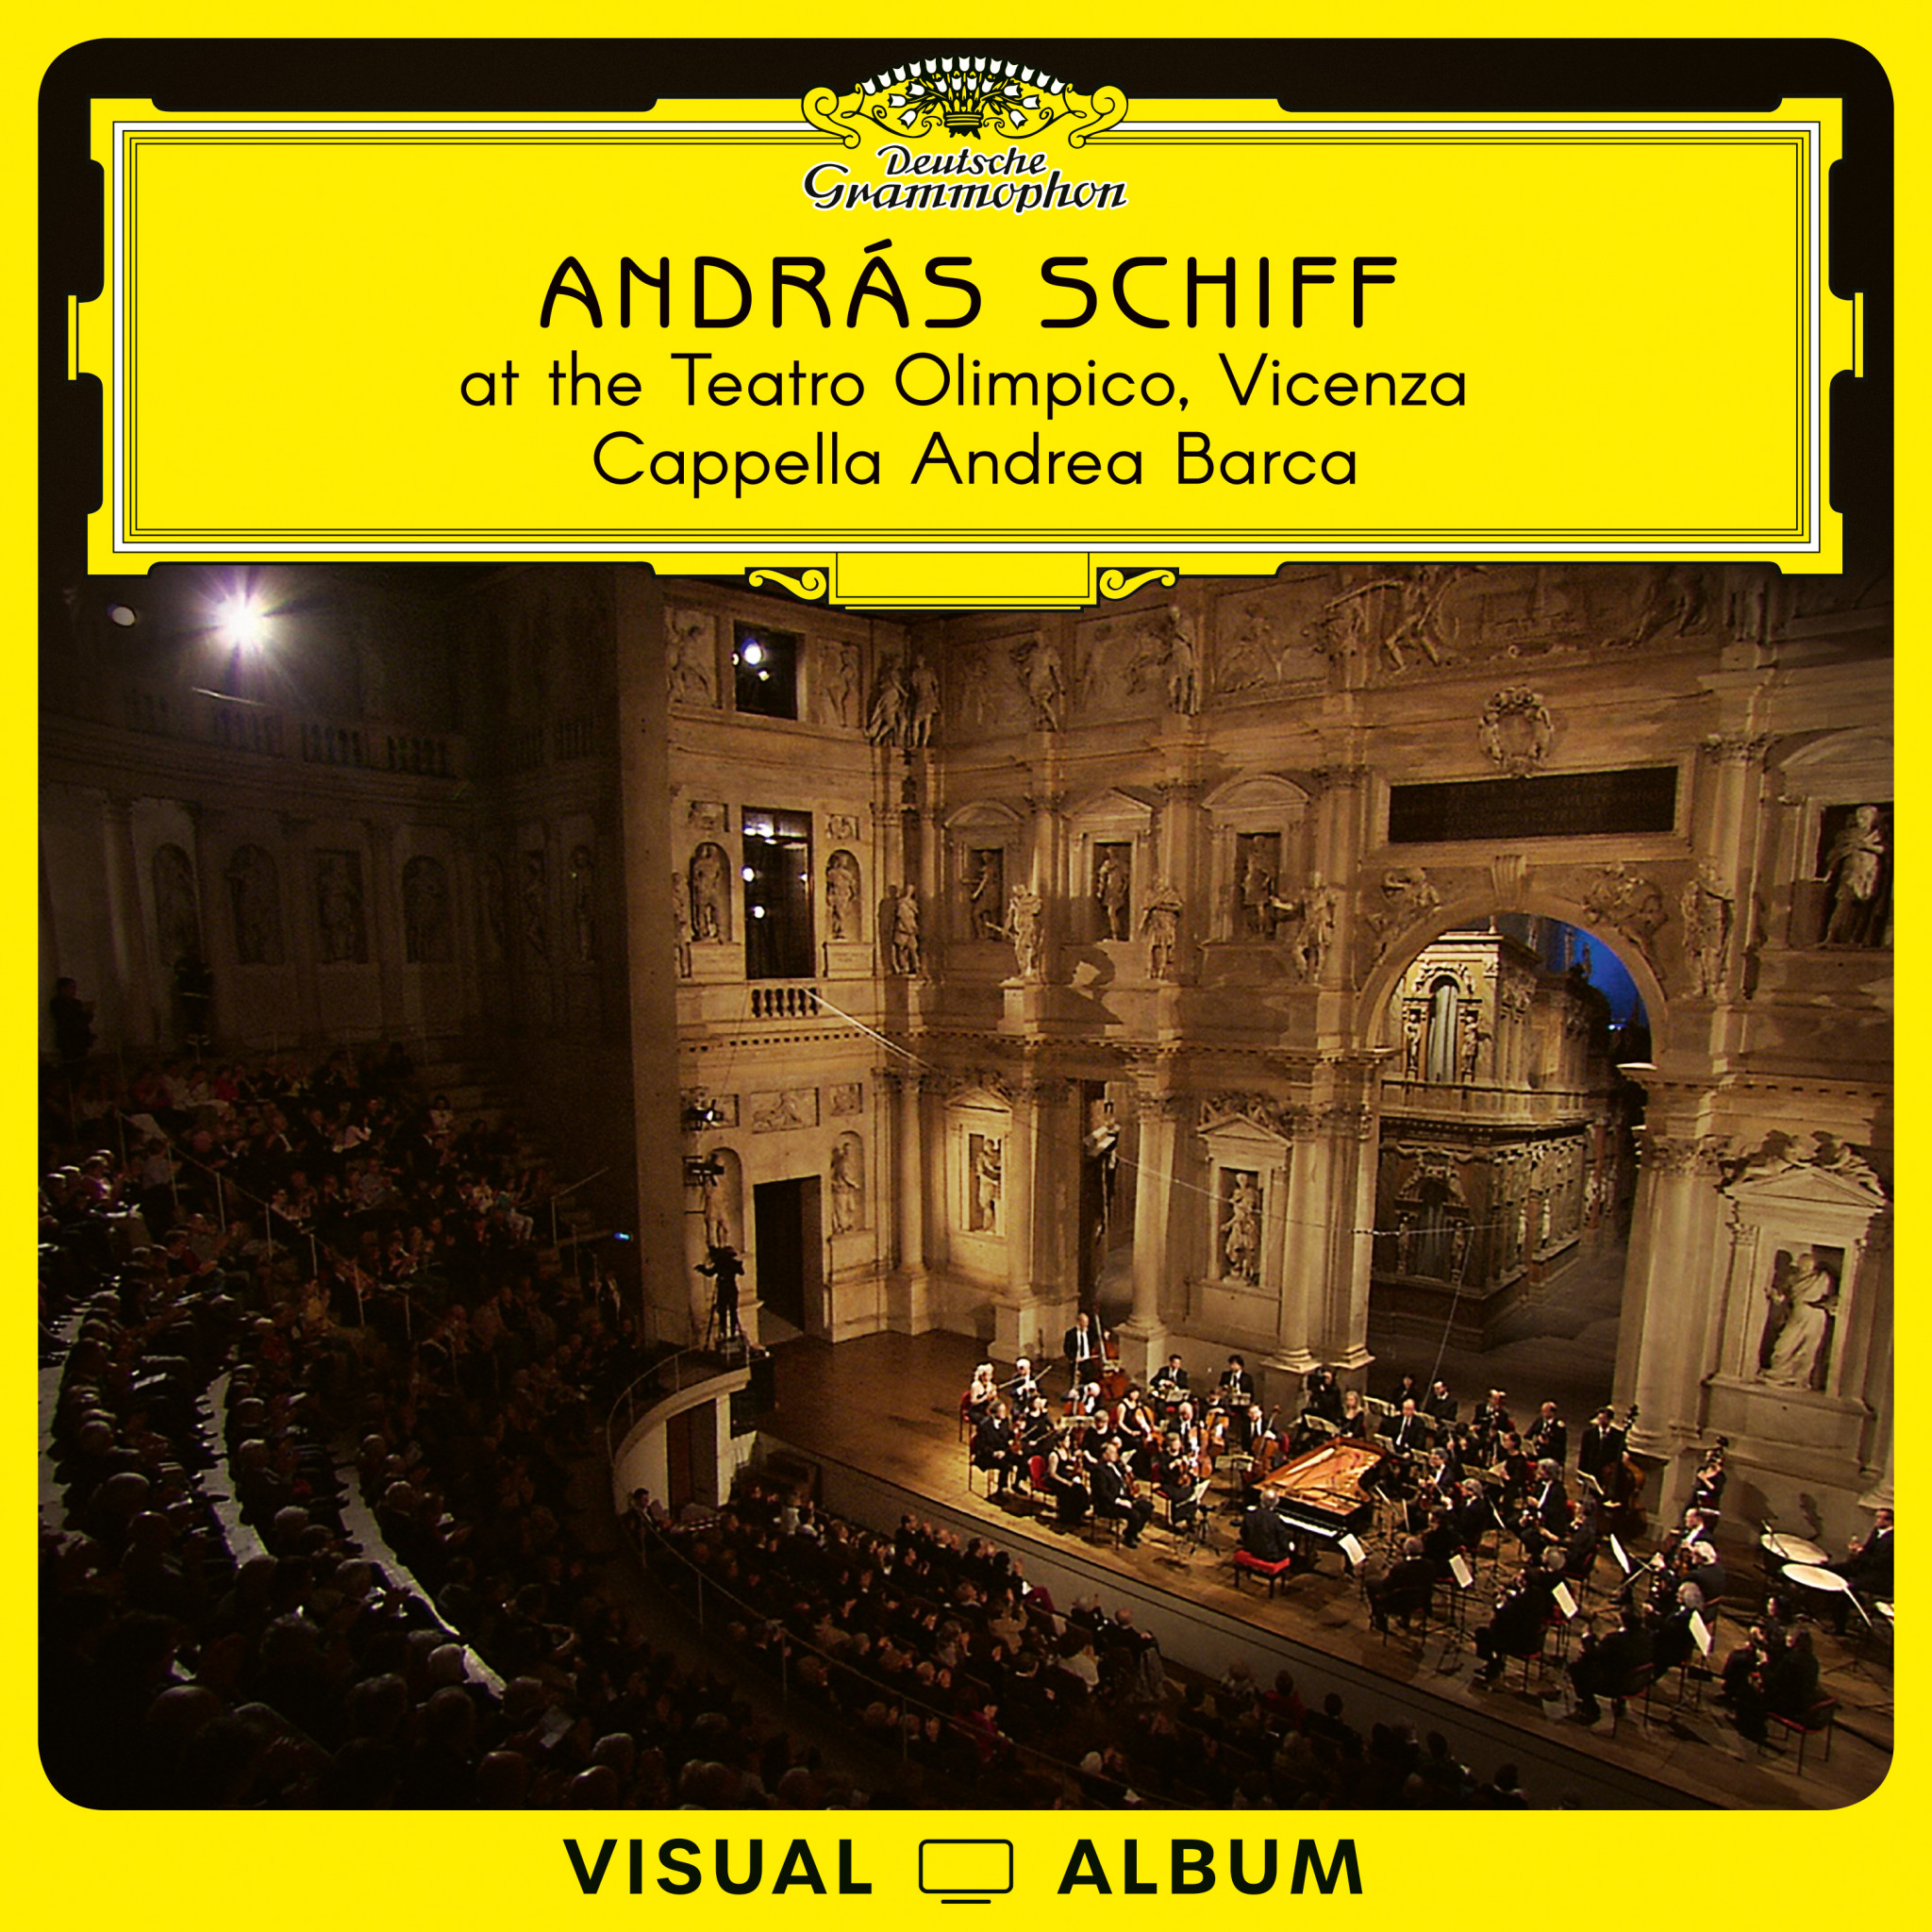 ANDRÁS SCHIFF AT THE TEATRO OLIMPICO, VICENZA